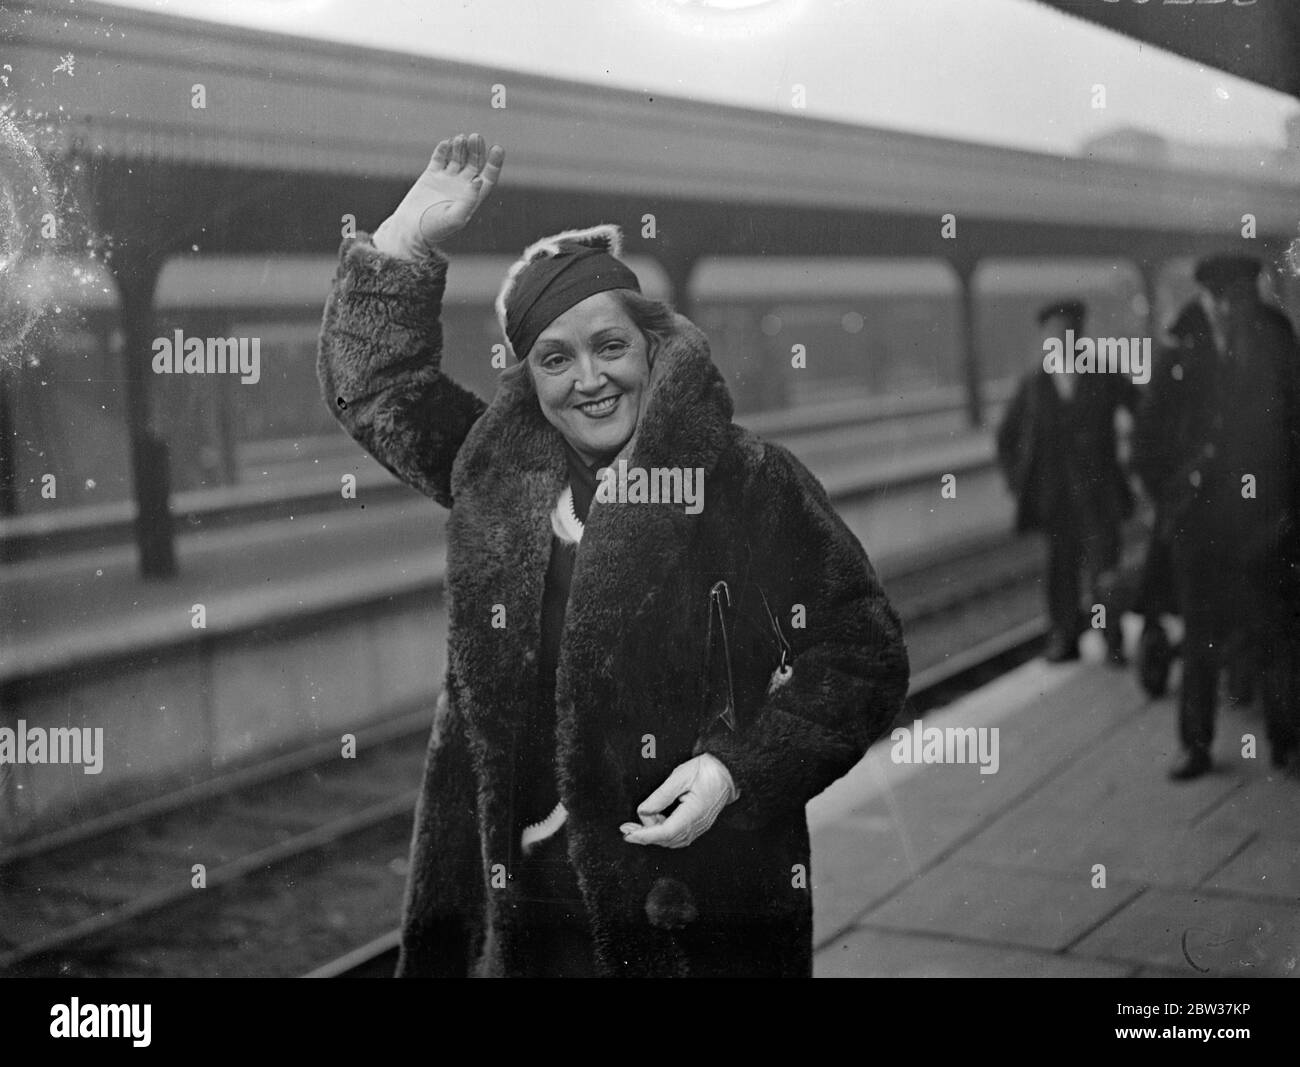 Miss Mary McCormick arrives in London . Miss Mary McCormick , the opera star , and former wife of Prince Serge Mdivani , arrived in London on the IIe de Drance boat train at Paddington Station . Despite the granting of an injunction to prevent her from appearing anywhere except in Hollywood , she is expected to appear at the London Palladium . Photo shows , Miss Mary McCormick on arrival at Paddington Station , London . 19 January 1934 Stock Photo